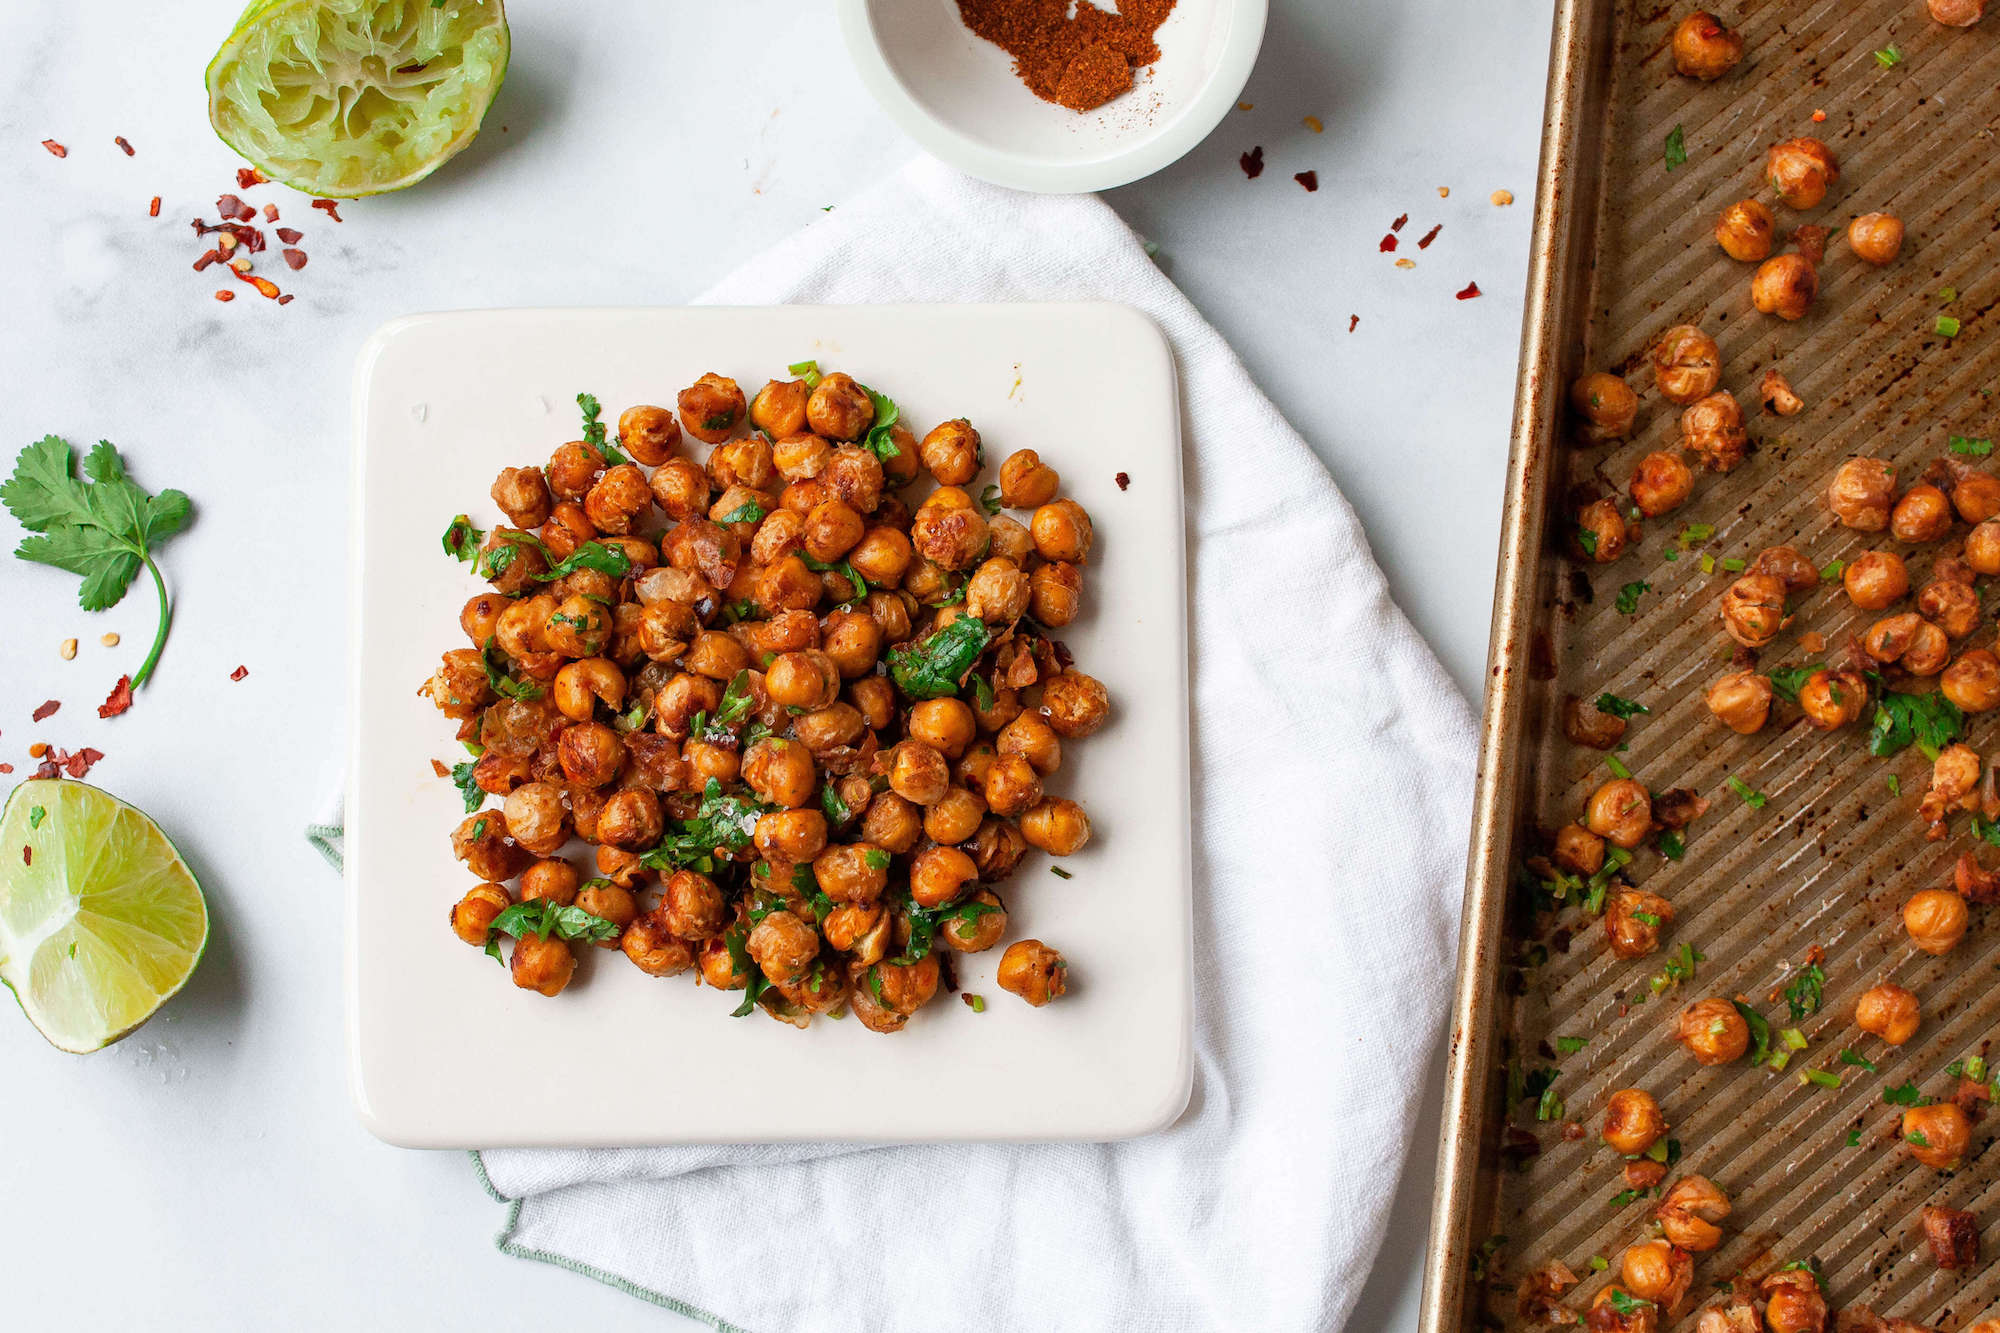 chili lime roasted chickpeas on plate with adjacent baking sheet | flexitarian diet